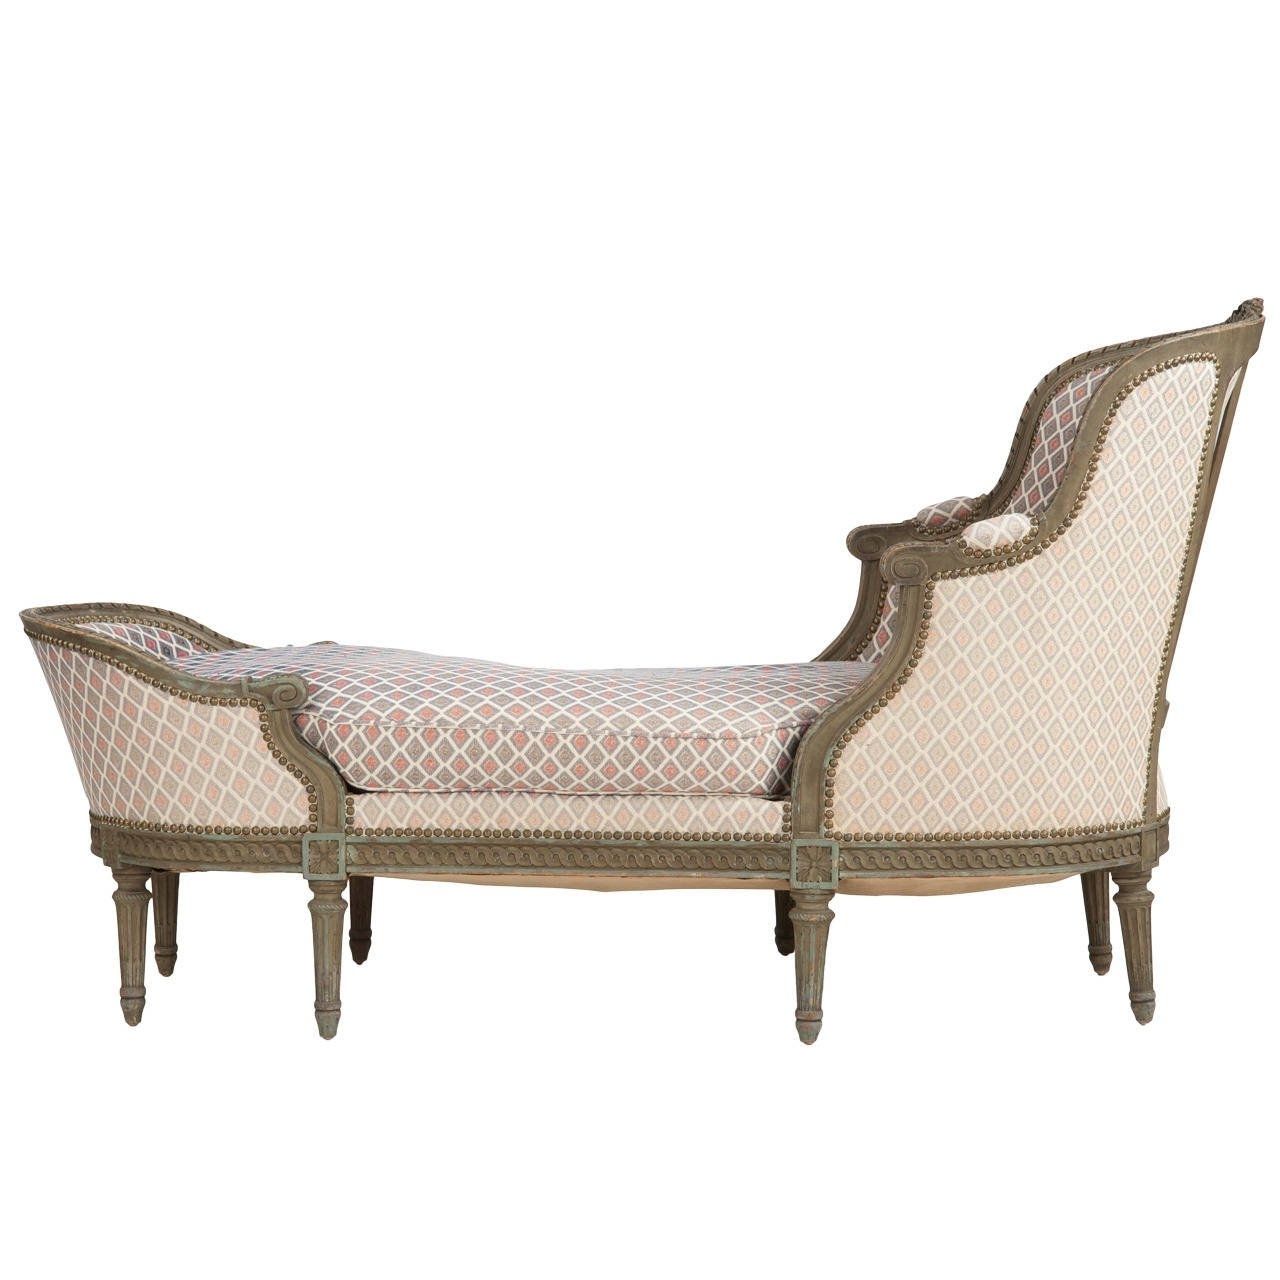 Antique Chaise Lounge Chair • Lounge Chairs Ideas Within Well Known Antique Chaise Lounge Chairs (View 4 of 15)